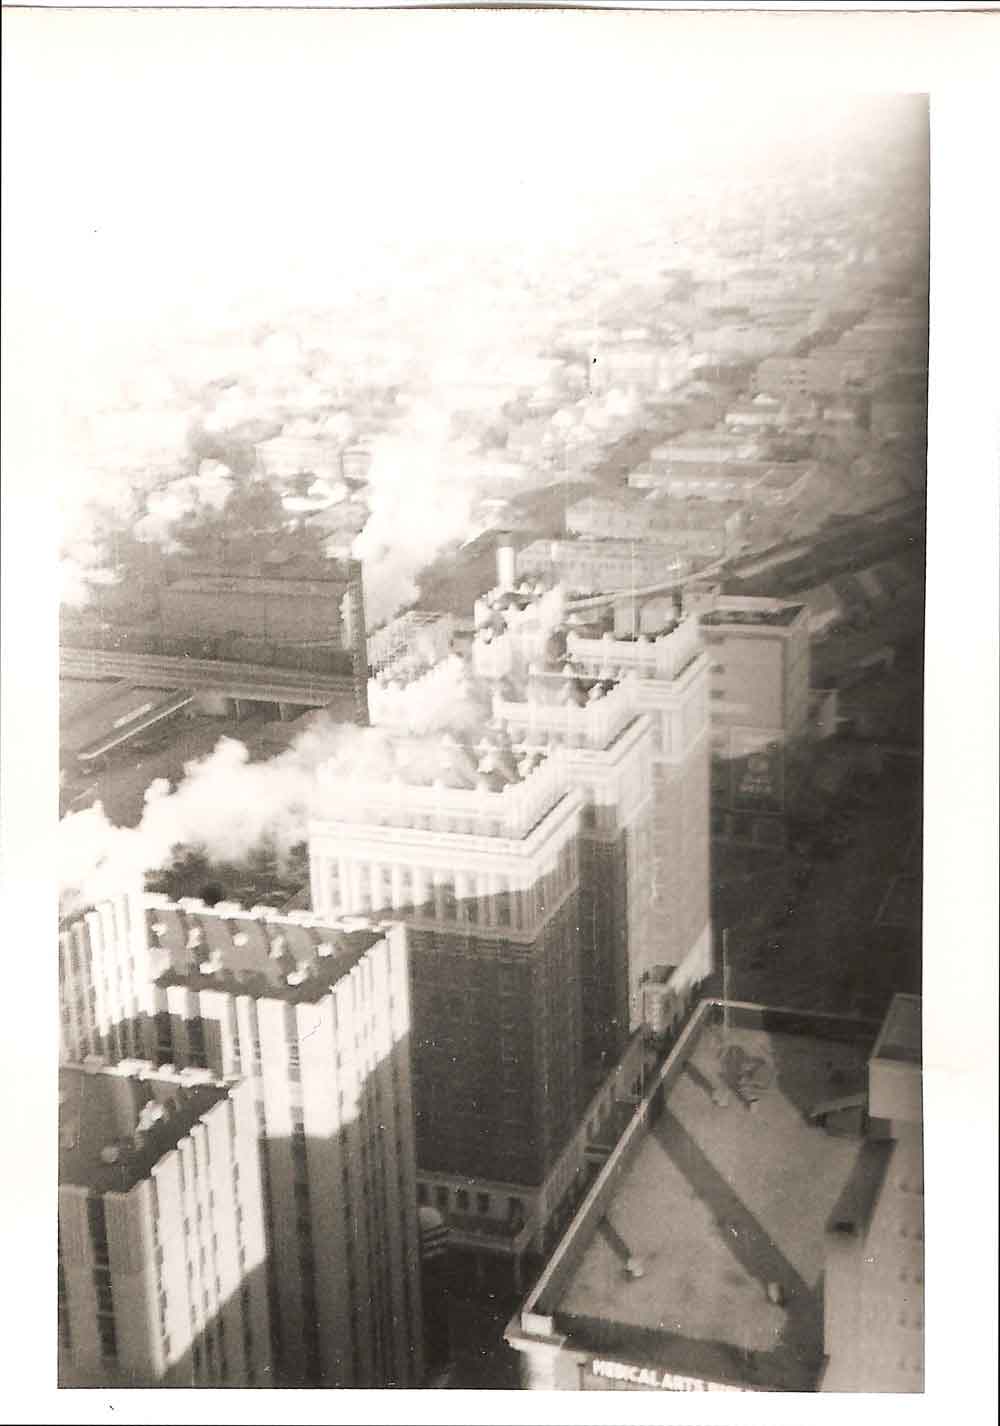 (HTC.2010.6.02) - View East Northeast from the First National Bank Building, c. 1937